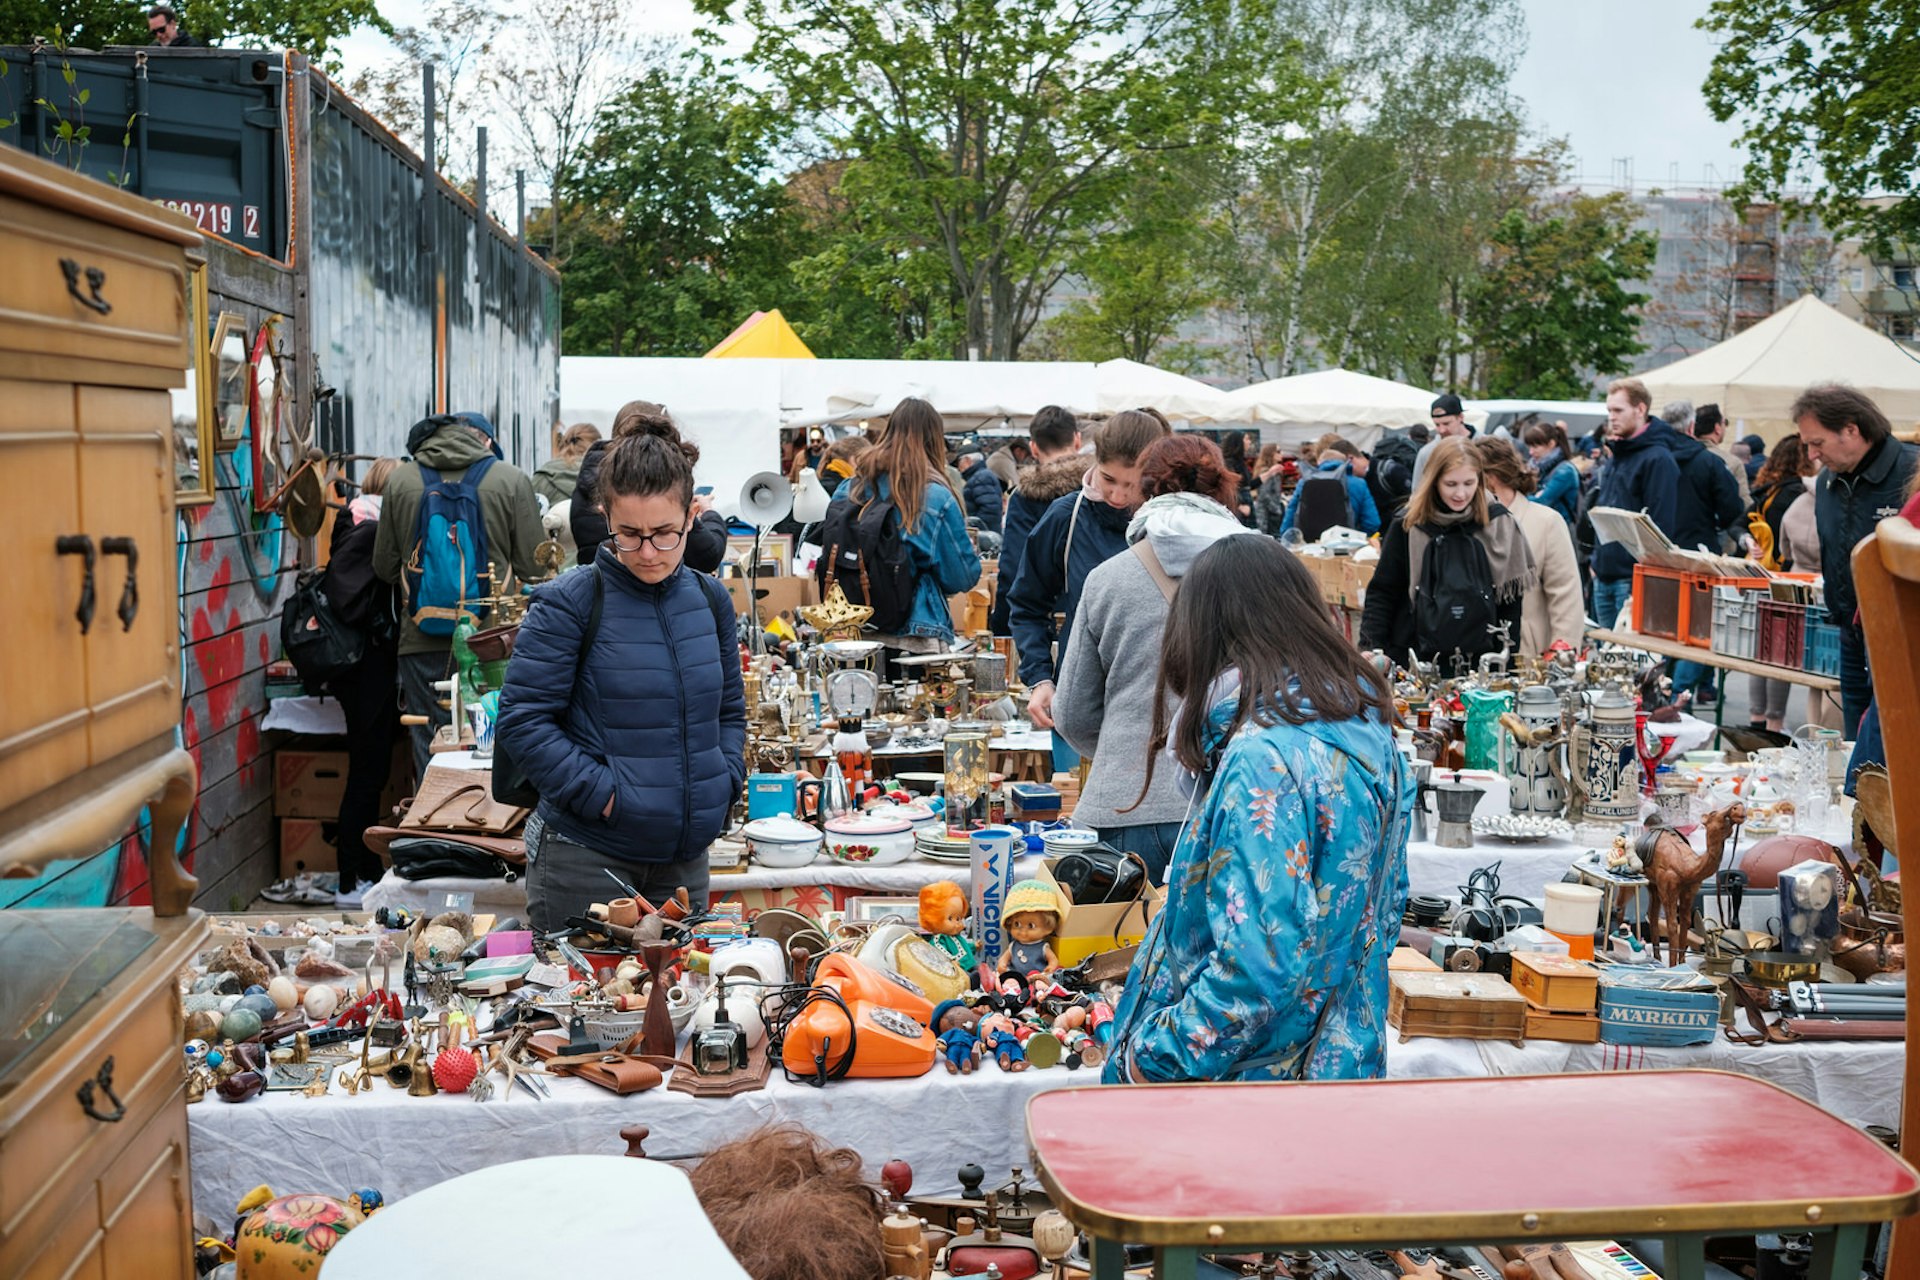 People browsing through item's at a flea market in Berlin's Mauerpark. People are wearing light jackets and looking at various items displayed on closely-packed tables. Some of the wares include; pots, toys, old-fashioned phones, ornaments and furniture.